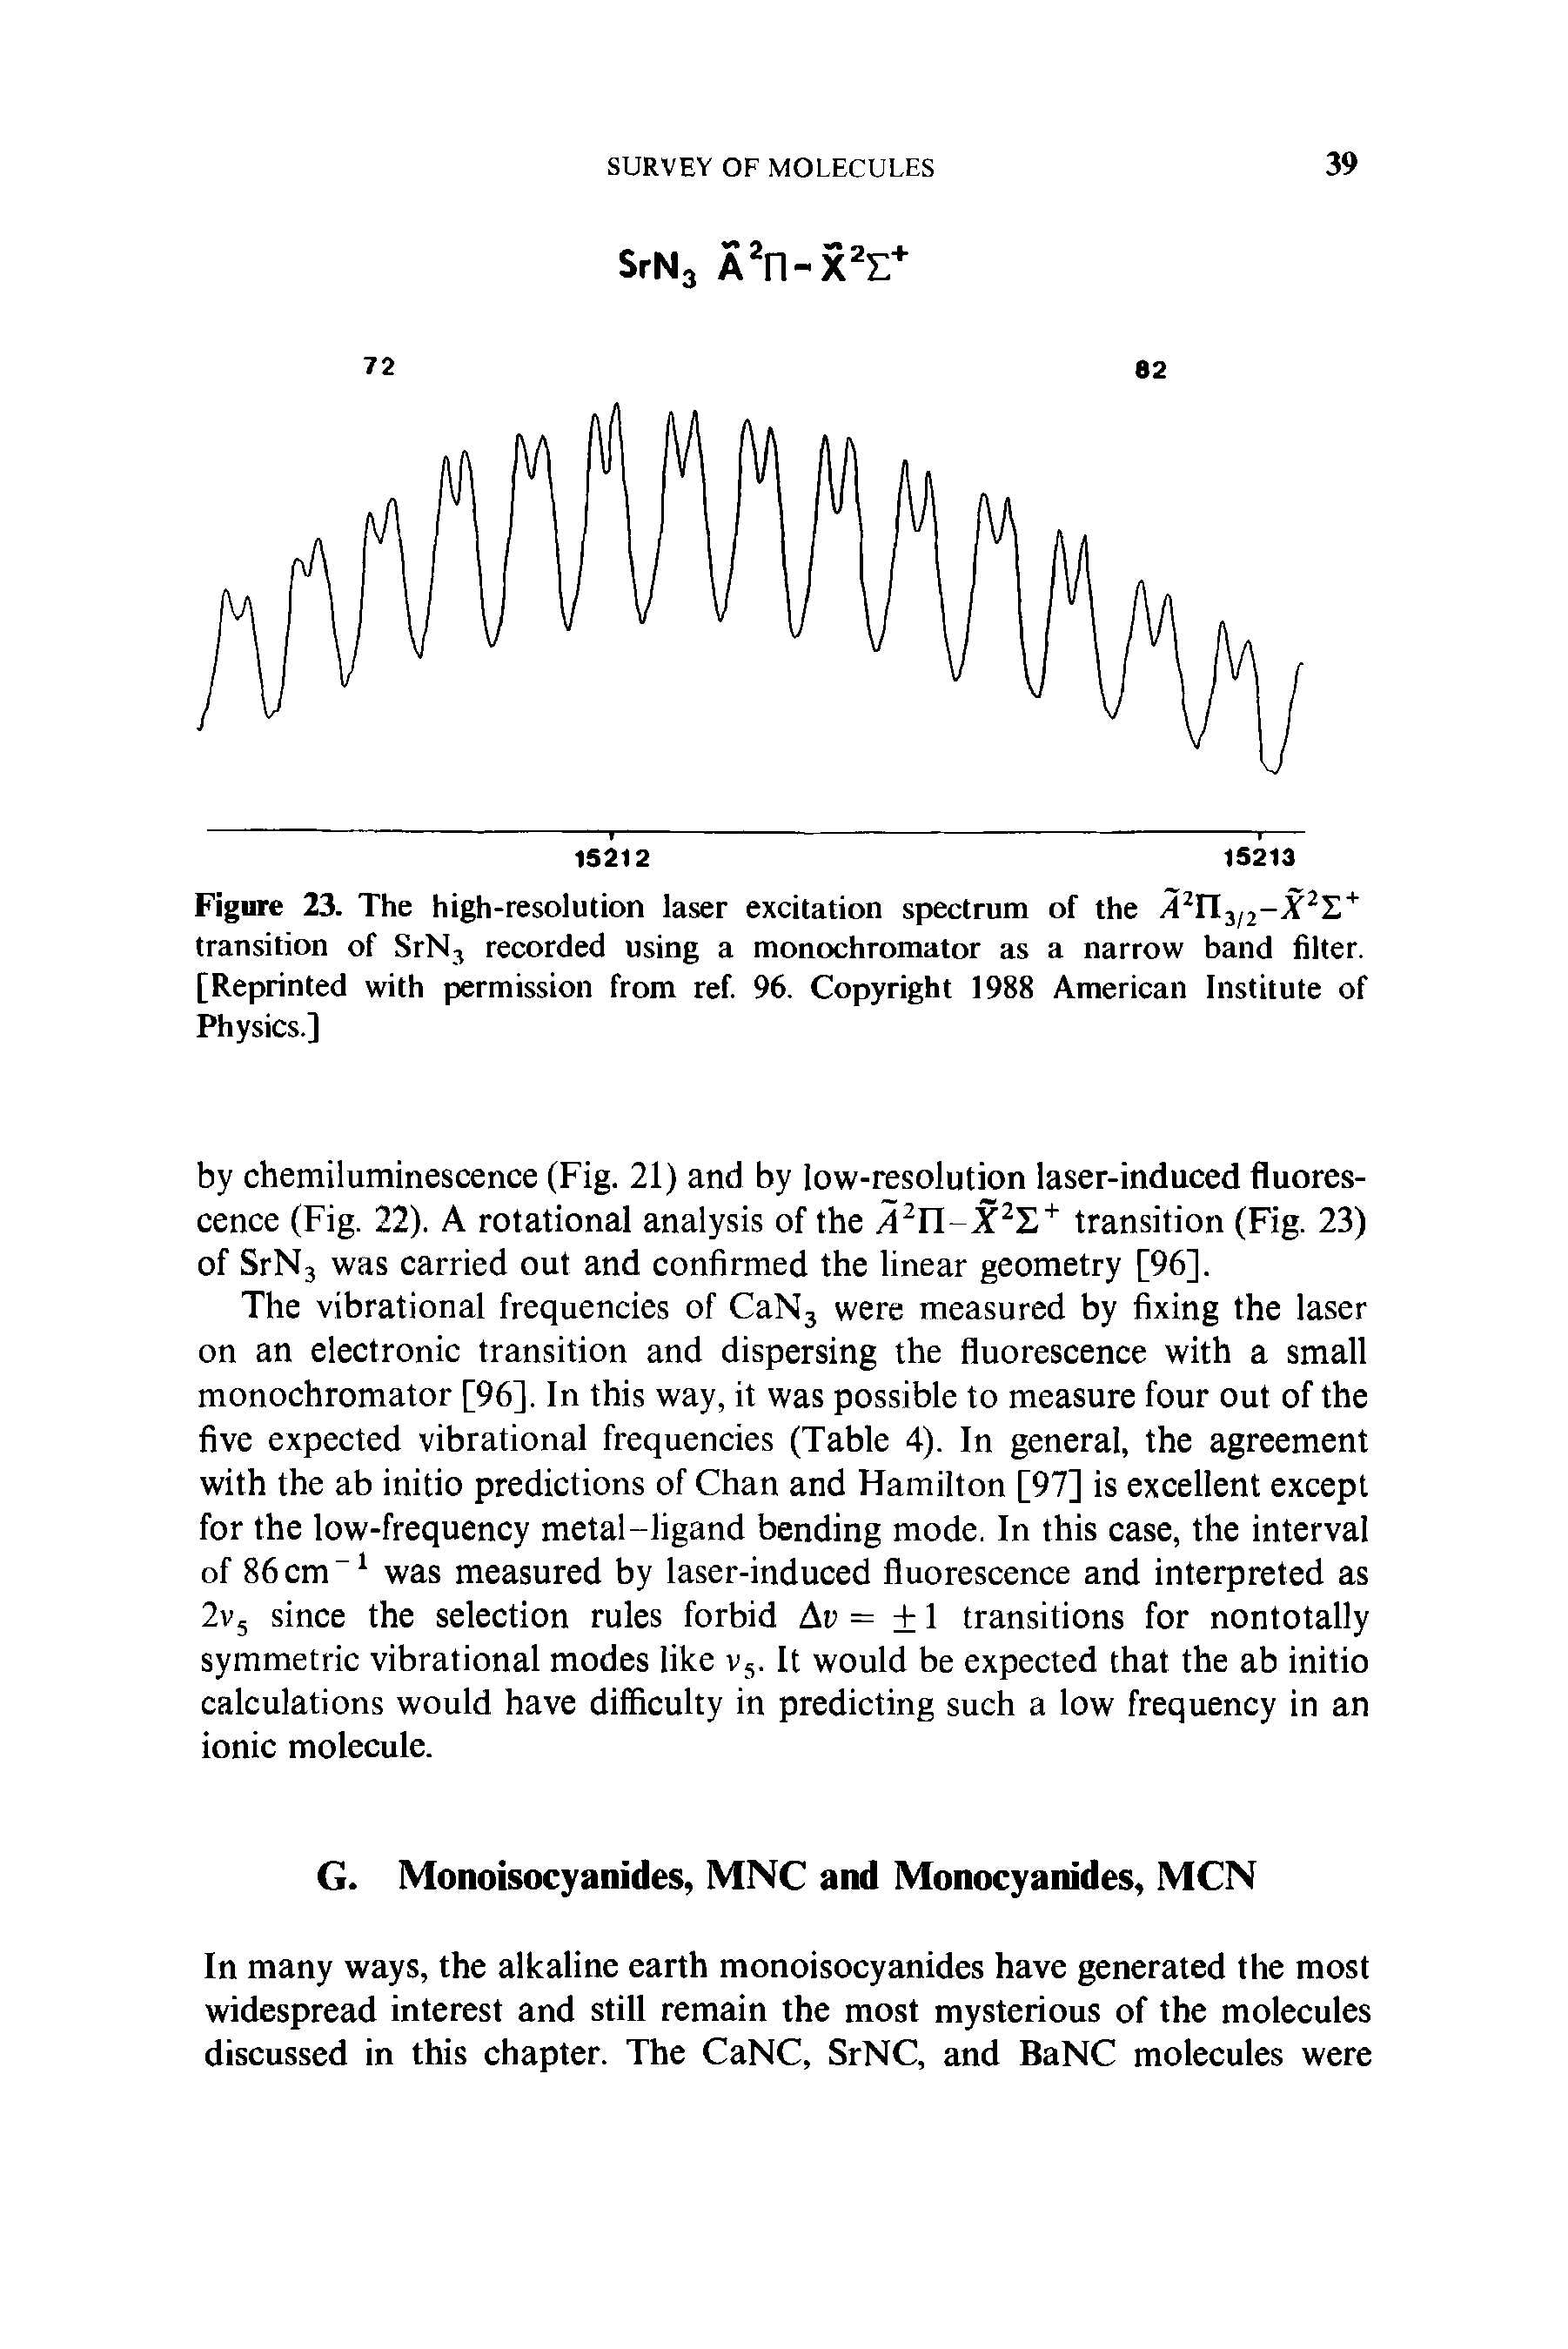 Figure 23. The high-resolution laser excitation spectrum of the T2n3/2- 2Z+ transition of SrN3 recorded using a monochromator as a narrow band filter. [Reprinted with permission from ref. 96. Copyright 1988 American Institute of Physics.]...